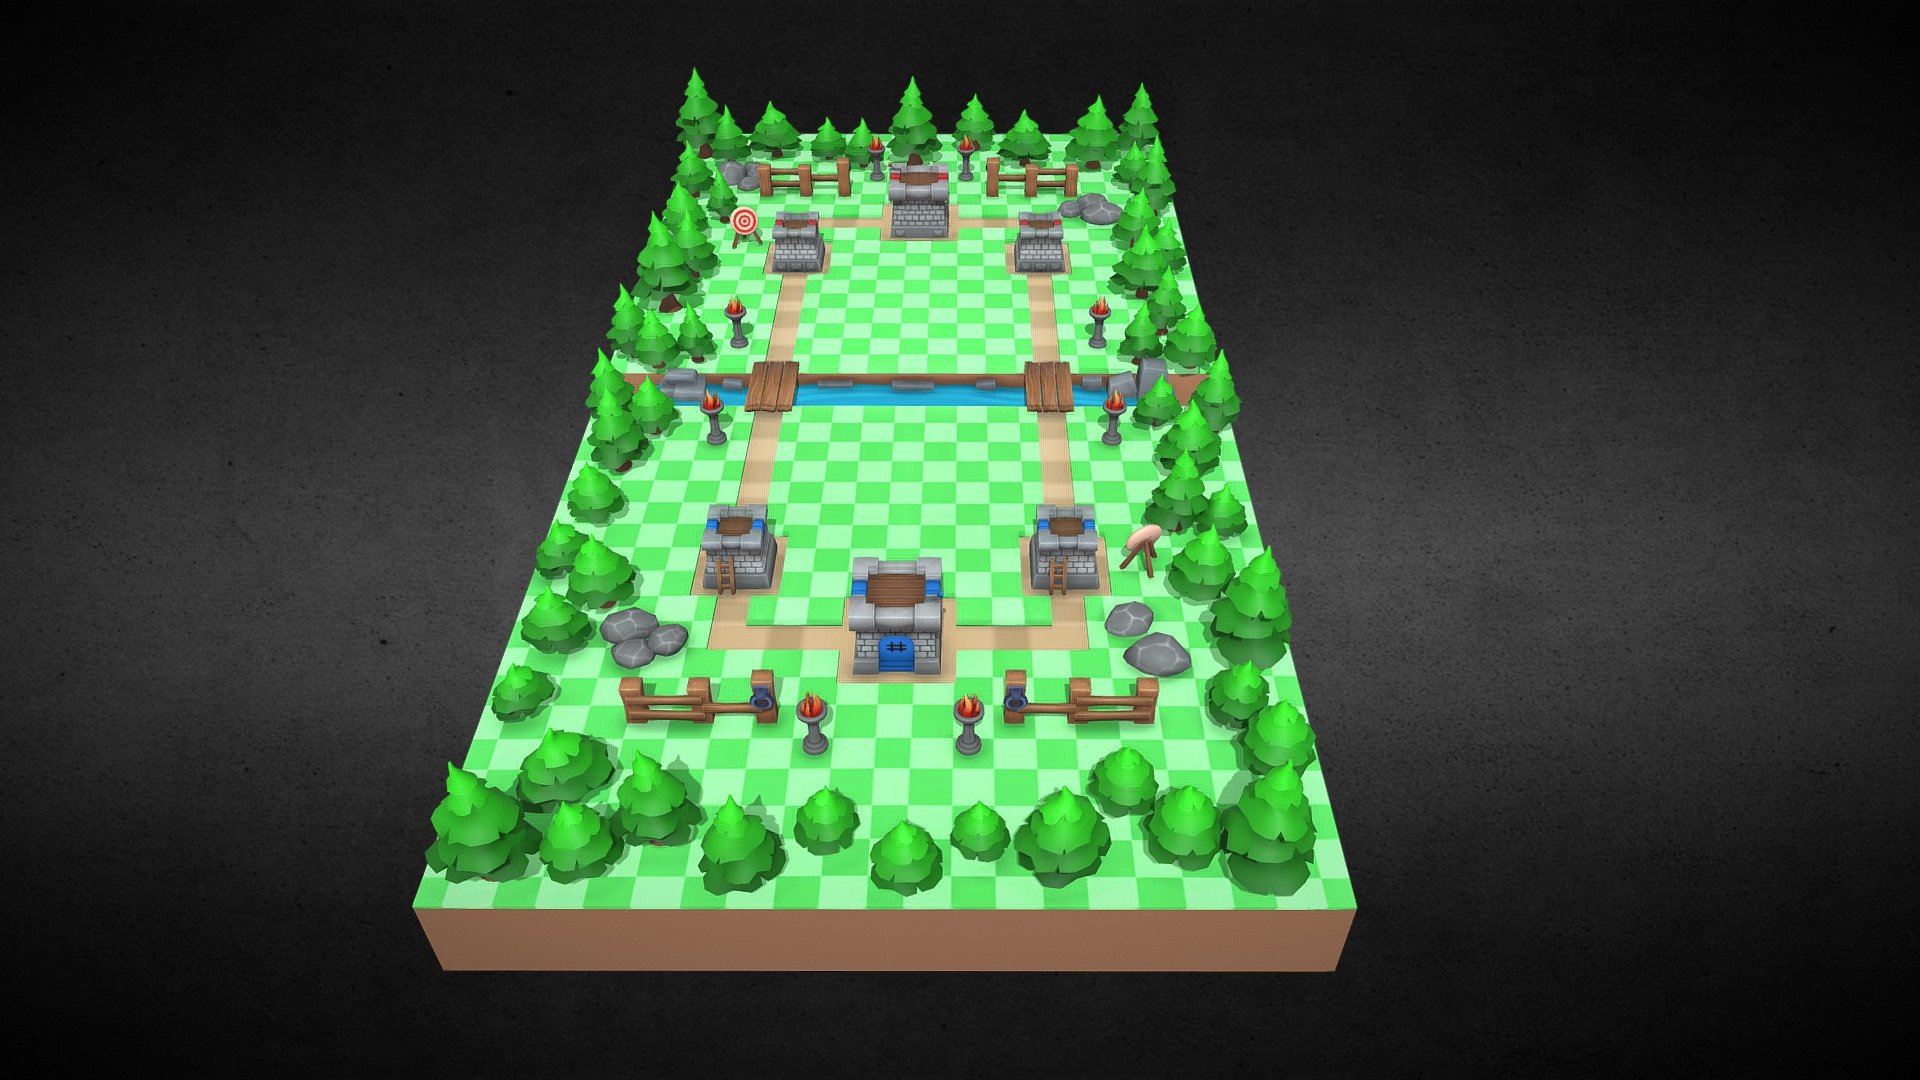 Here is a 3d low poly Clash Royale environment study that I've modelled and textured in my style.

I've used hand painting technique on most of the assets.Only tress and target boards are textured with colour palette.And I used 5 texture maps for all assets.All models optimized for a game engine.

All Towers + Flags + Ladders and Doors = 1 Colour Map ( Hand Painted )

Wooden Bridges + Fences = 1 Colour Map ( Hand Painted )

Rocks + Torches = 1 Colour Map ( Hand Painted )

Trees + Target Boards = 1 Colour Map ( Colour Palette )

Ground + River = 1 Colour Map ( Hand Painted )

Vertices : 6609
Faces : 6174
Triangles : 11795

Modelled : Blender 2.91
Textured : Blender 2.91 and Photoshop Cs6 - Clash Royale Concept 3d Environment Study - 3D model by Batuhan Oktay (@Batuhan.Oktay) 3d model